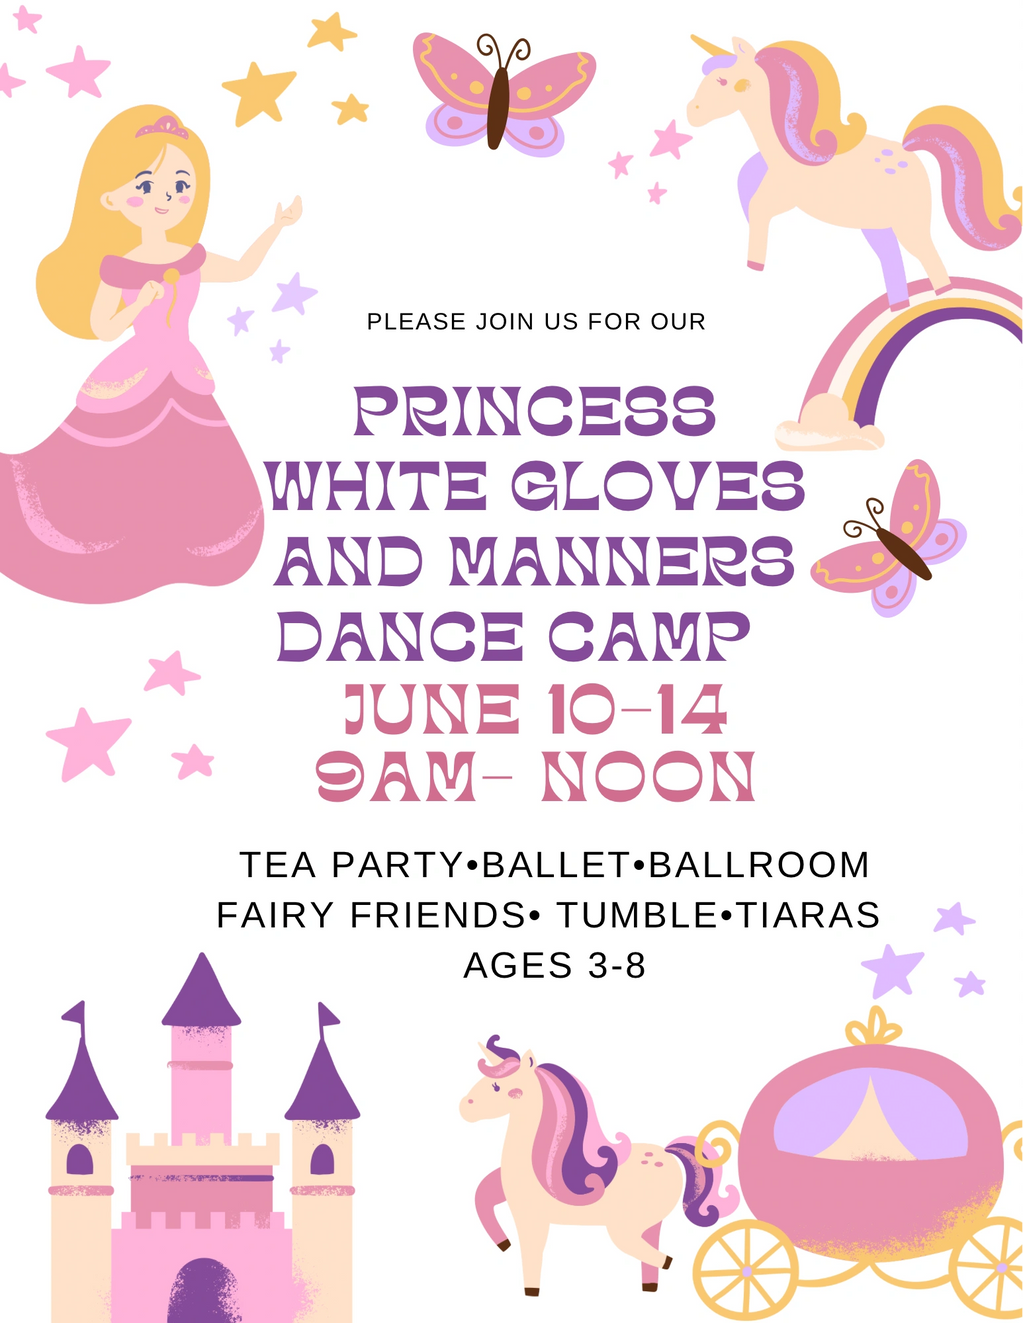 Princess White Gloves and Manners Dance Camp 